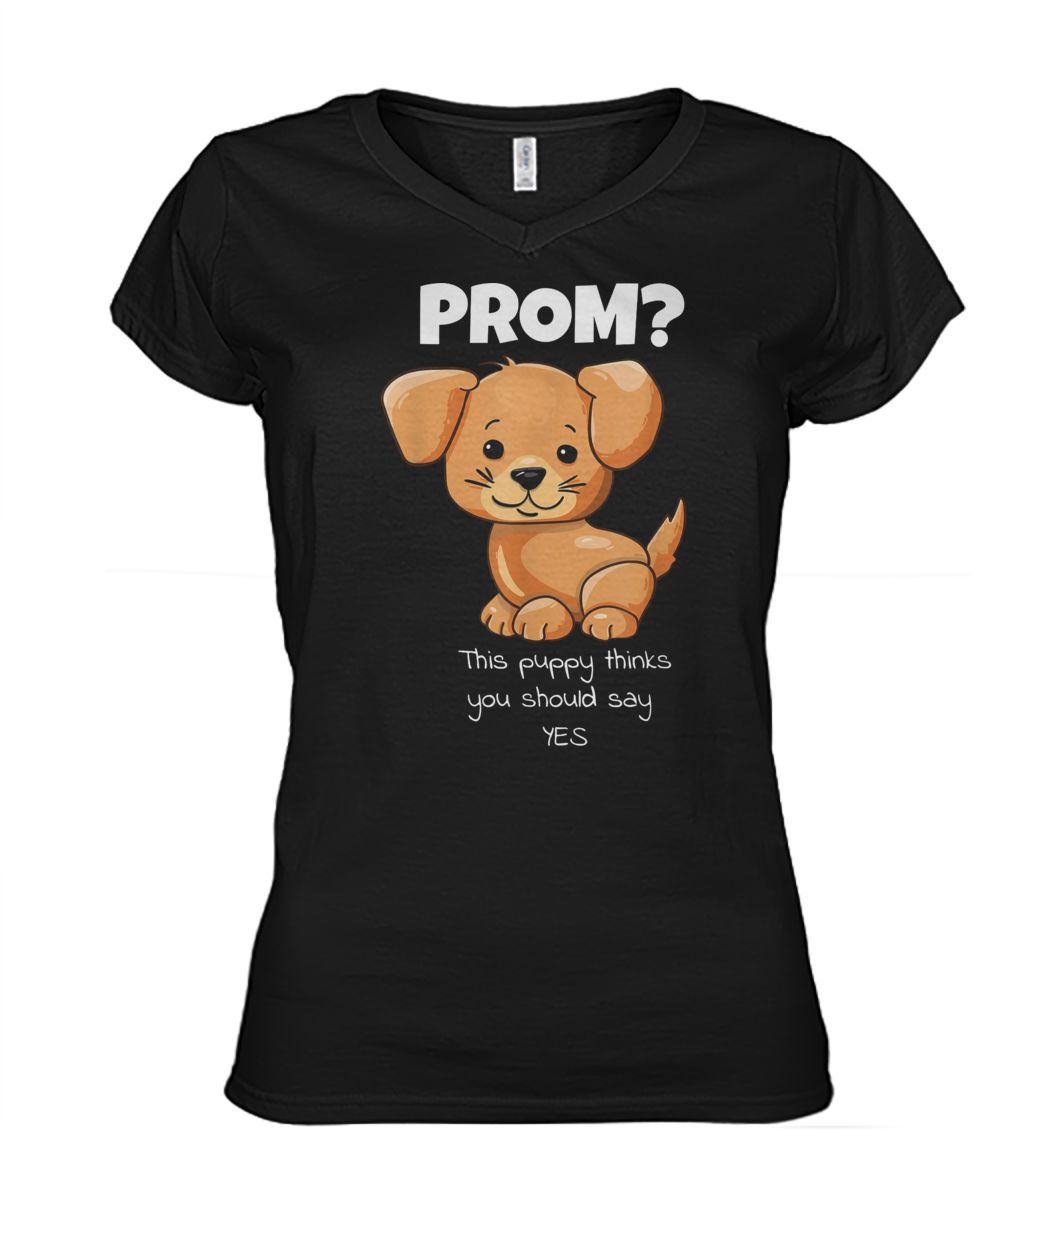 Will you go to prom puppy thinks you should say yes women's v-neck